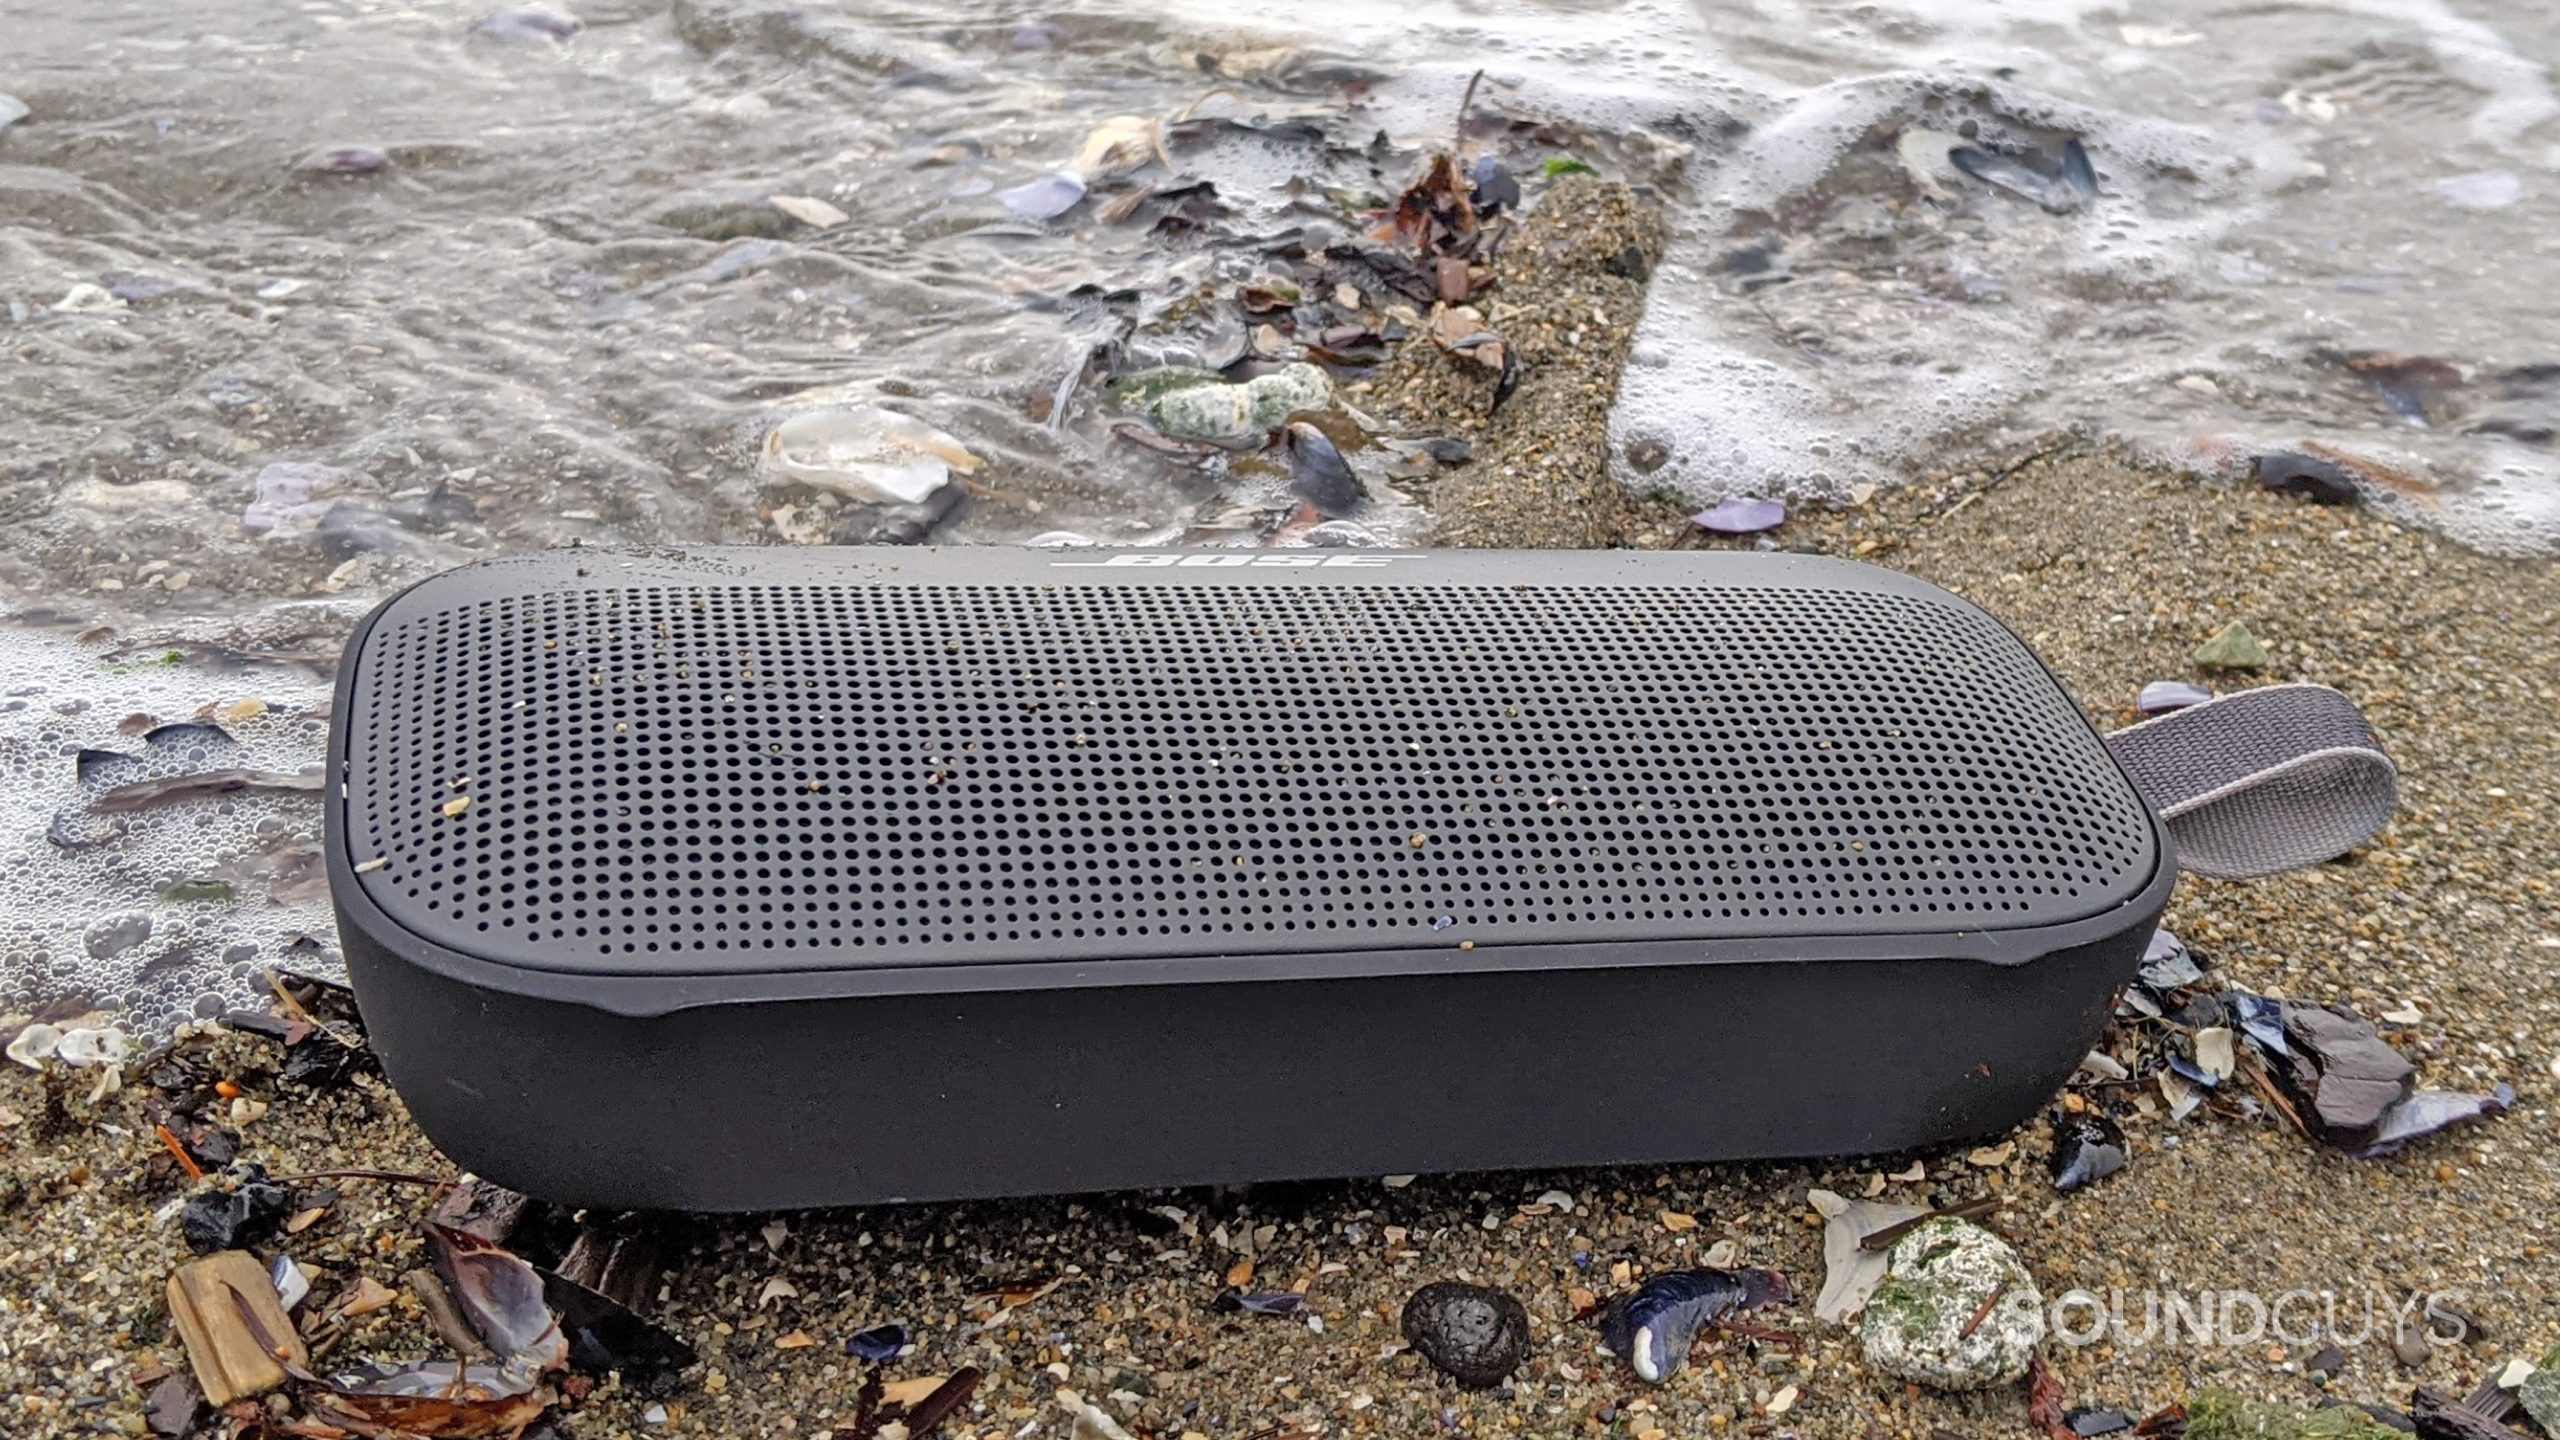 A photo of the Bose SoundLink Flex Bluetooth speaker lying face-up on the beach next to the ocean surrounded by shells and debris.